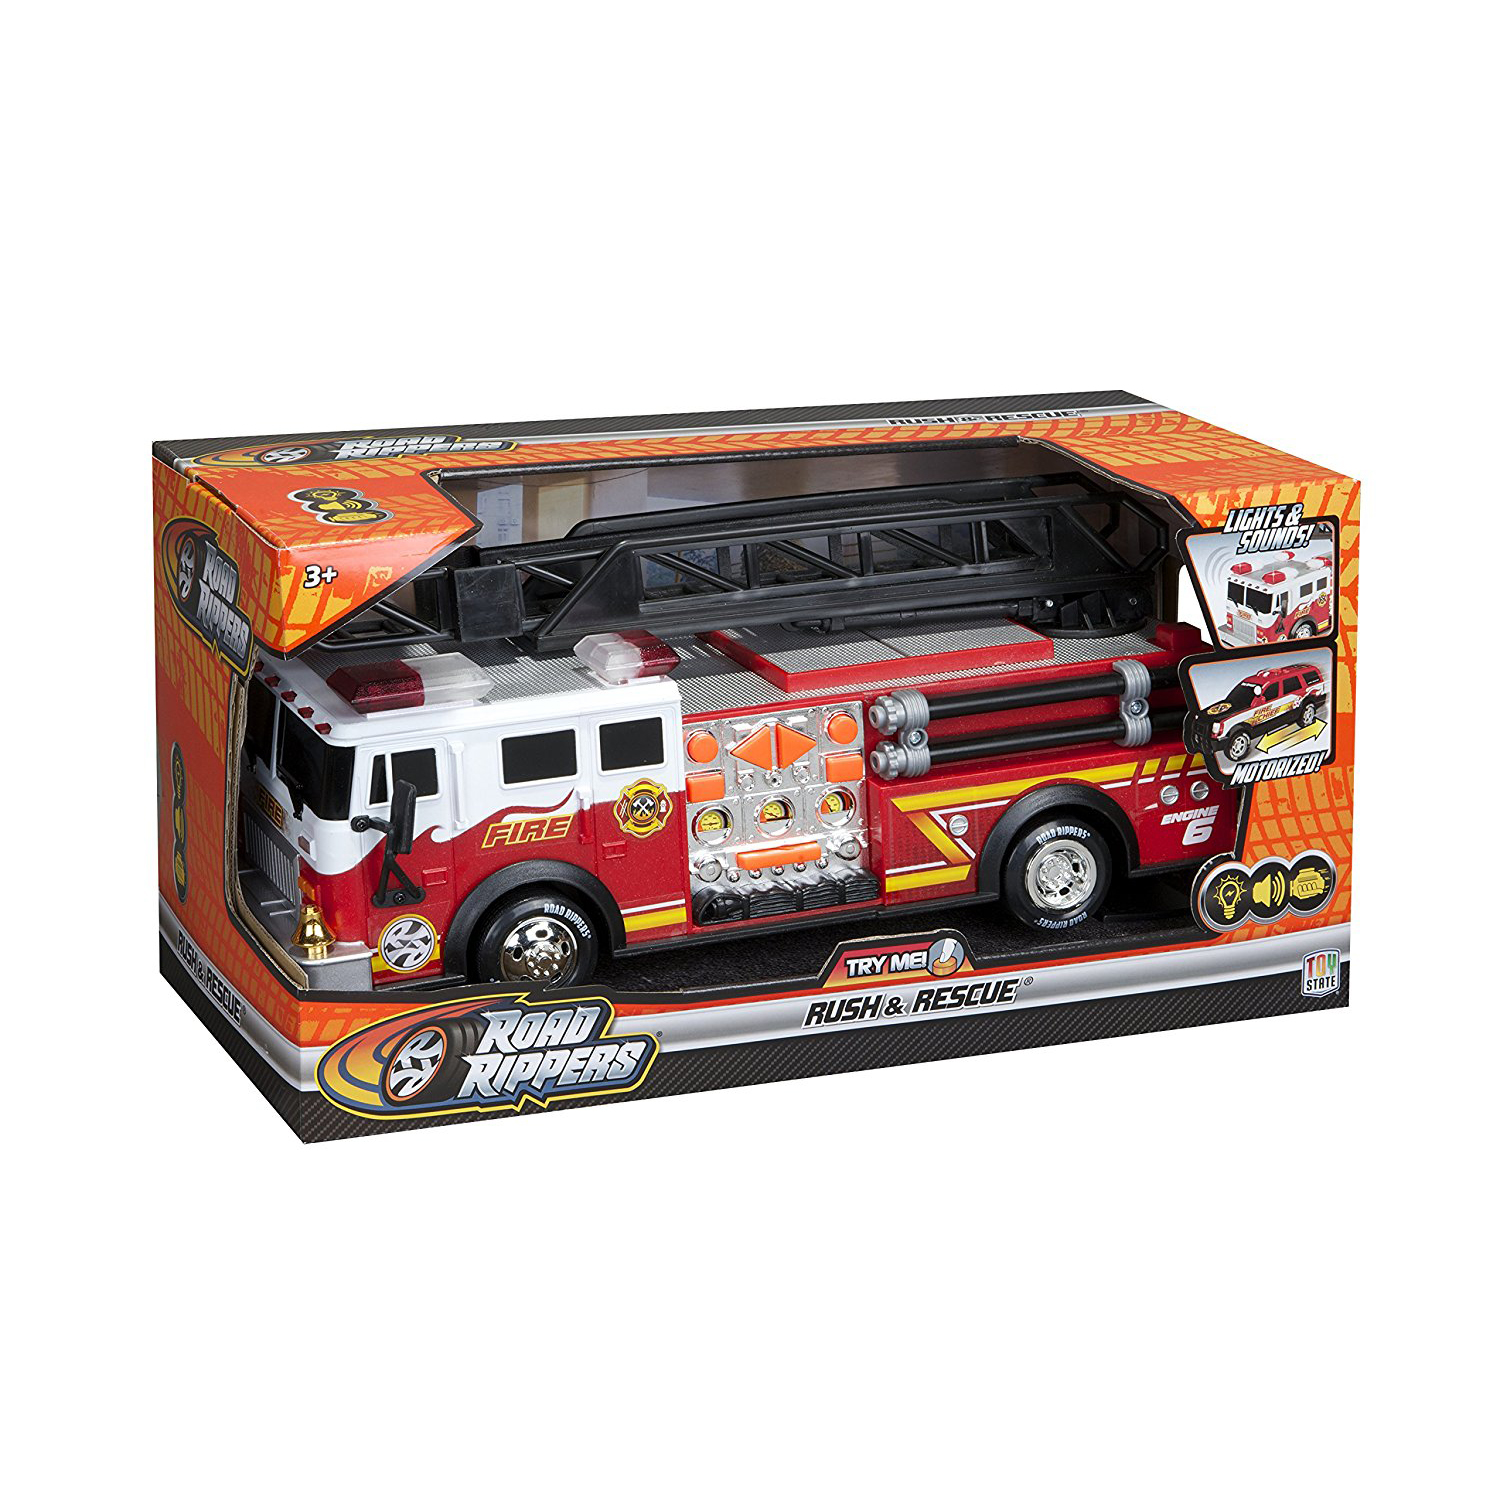 hook and ladder toy fire truck